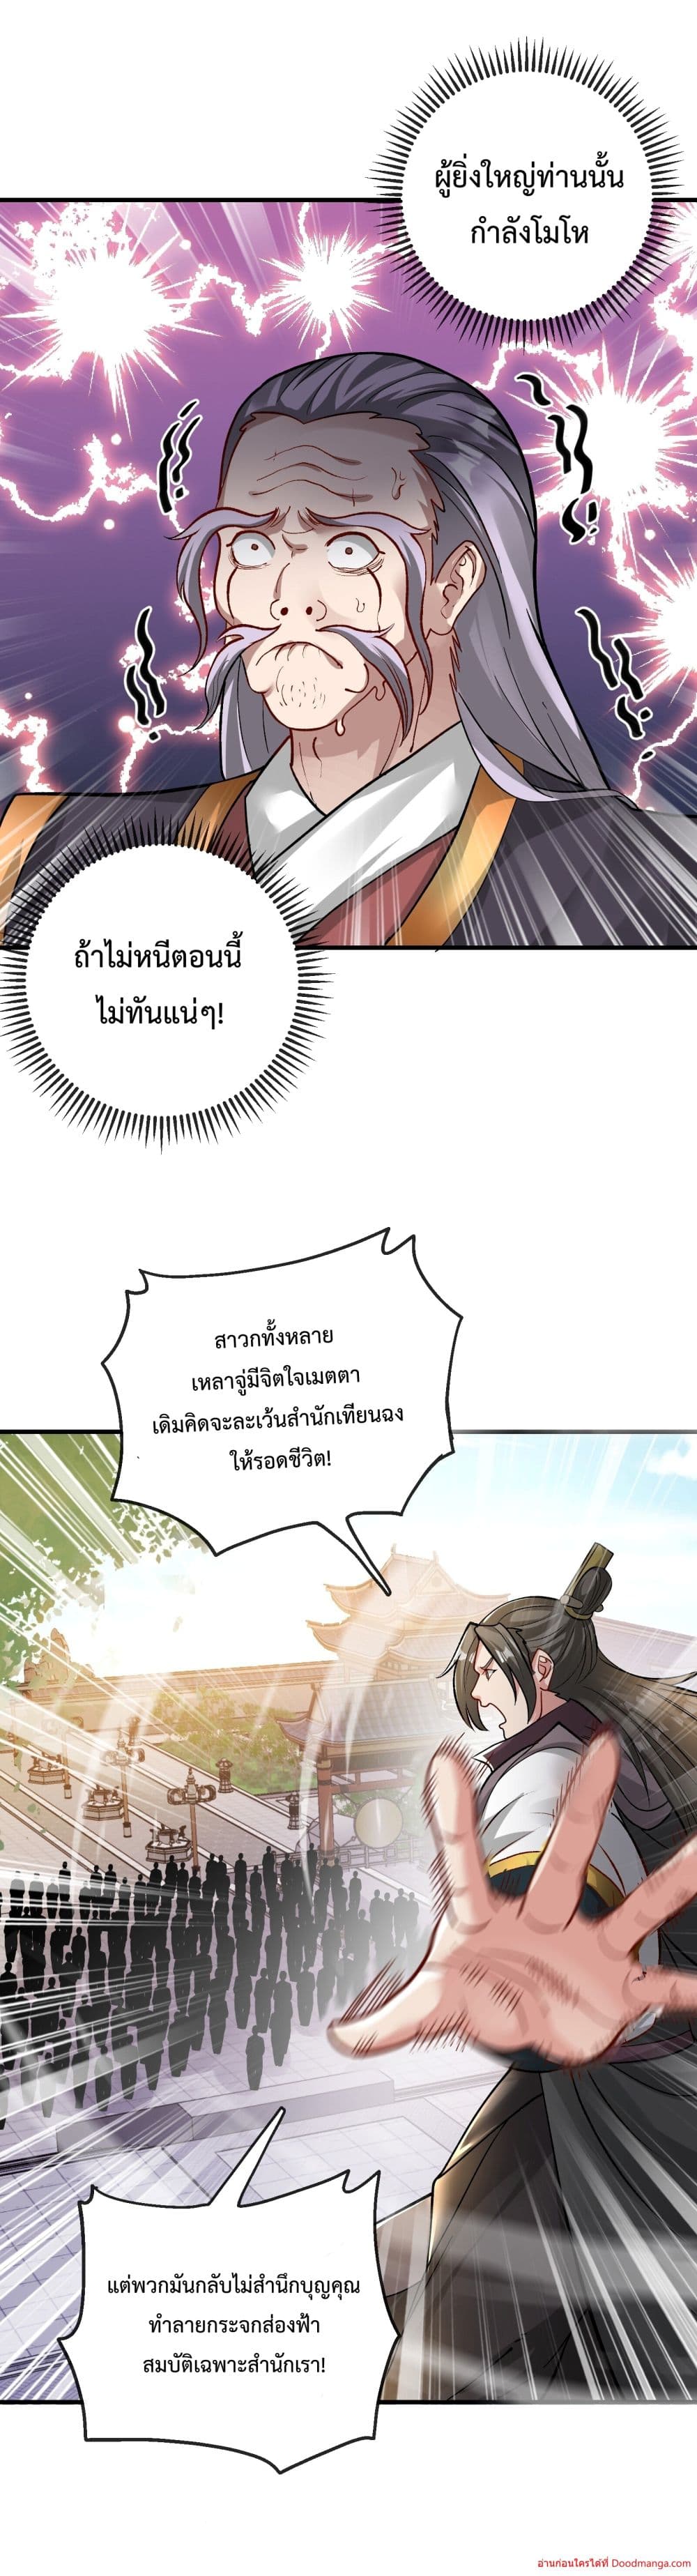 Invincible Within My Domain ตอนที่ 3 (17)